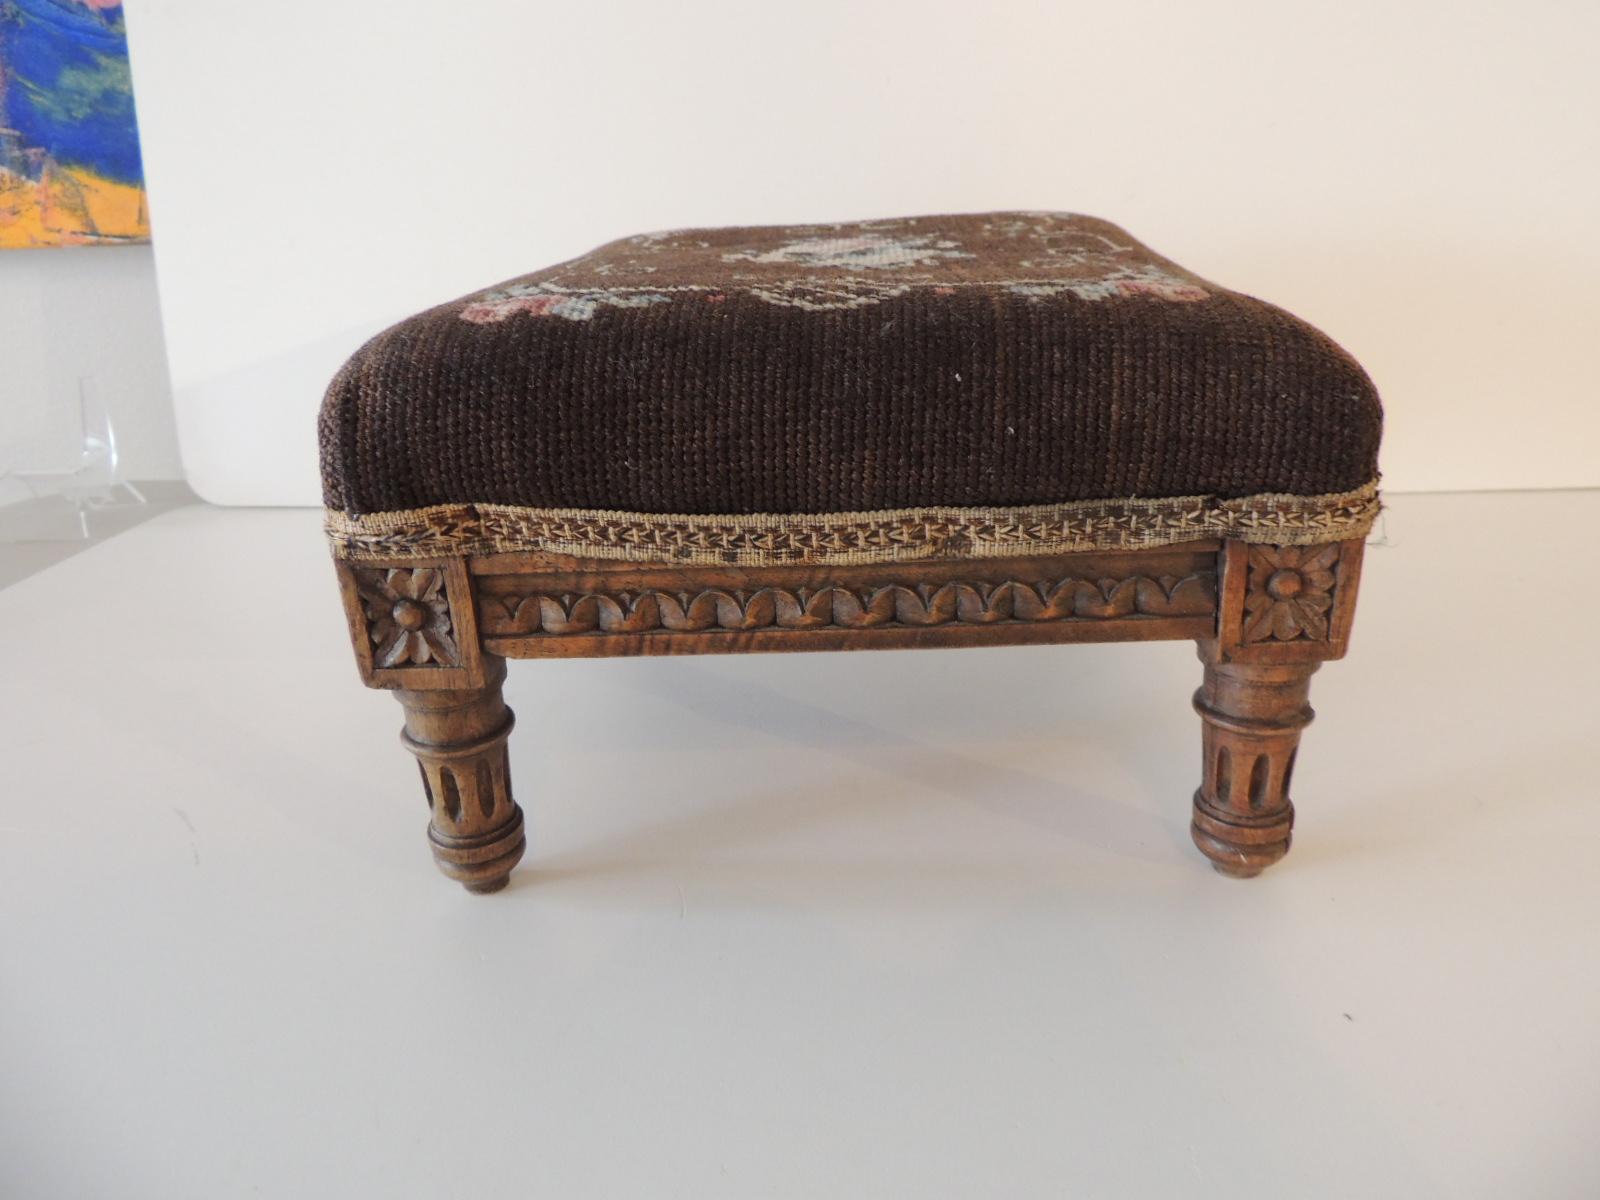 Antique Louis XVI style tapestry upholstered footstool.
Brown and pink tapestry covered and small gimp trim on wood frame.
Size: 10